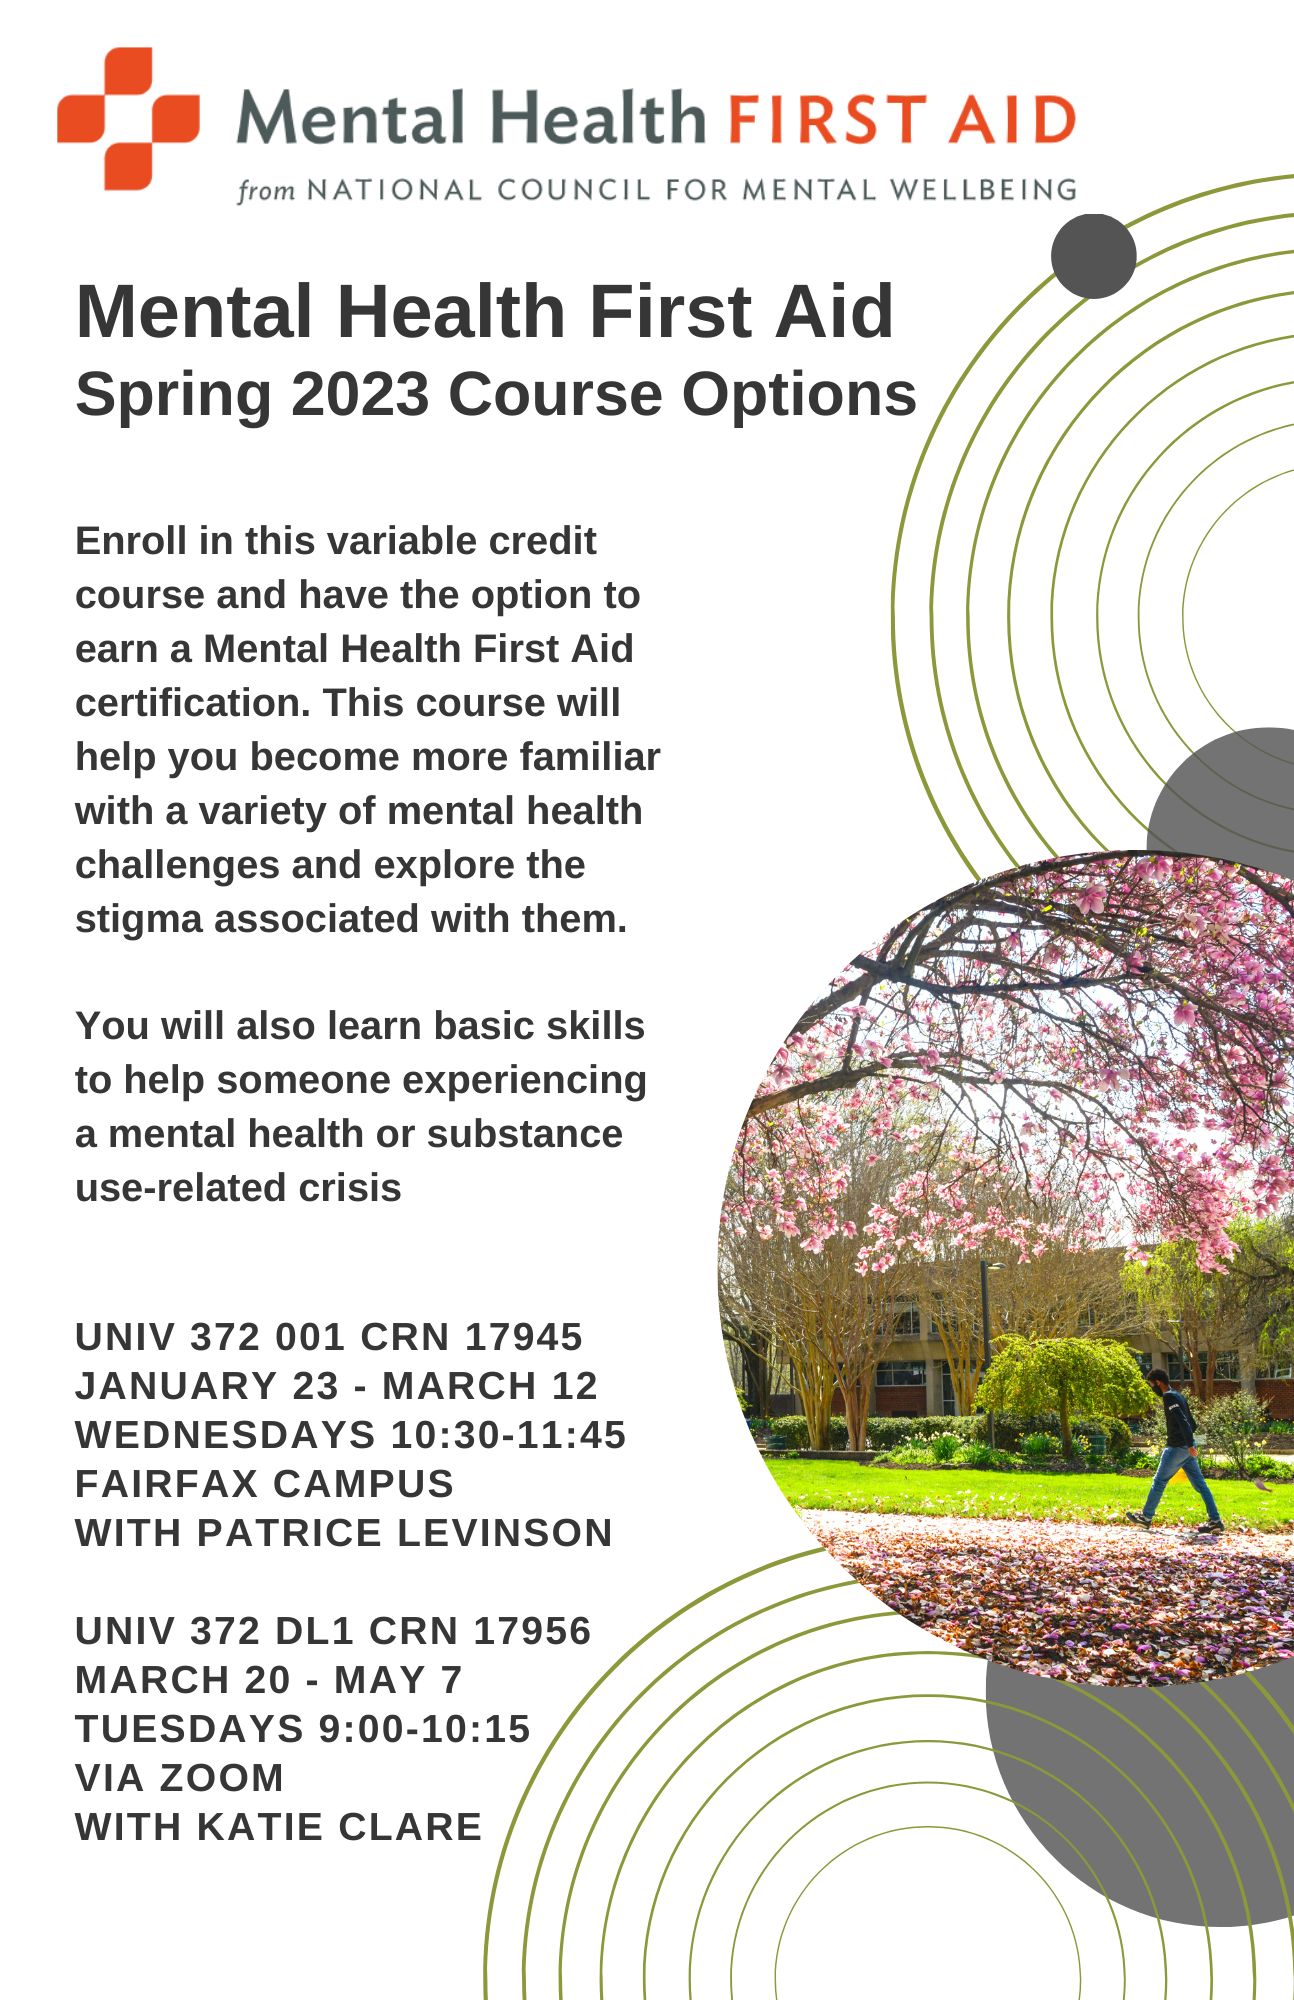 Mental Health First Aid course spring 2023